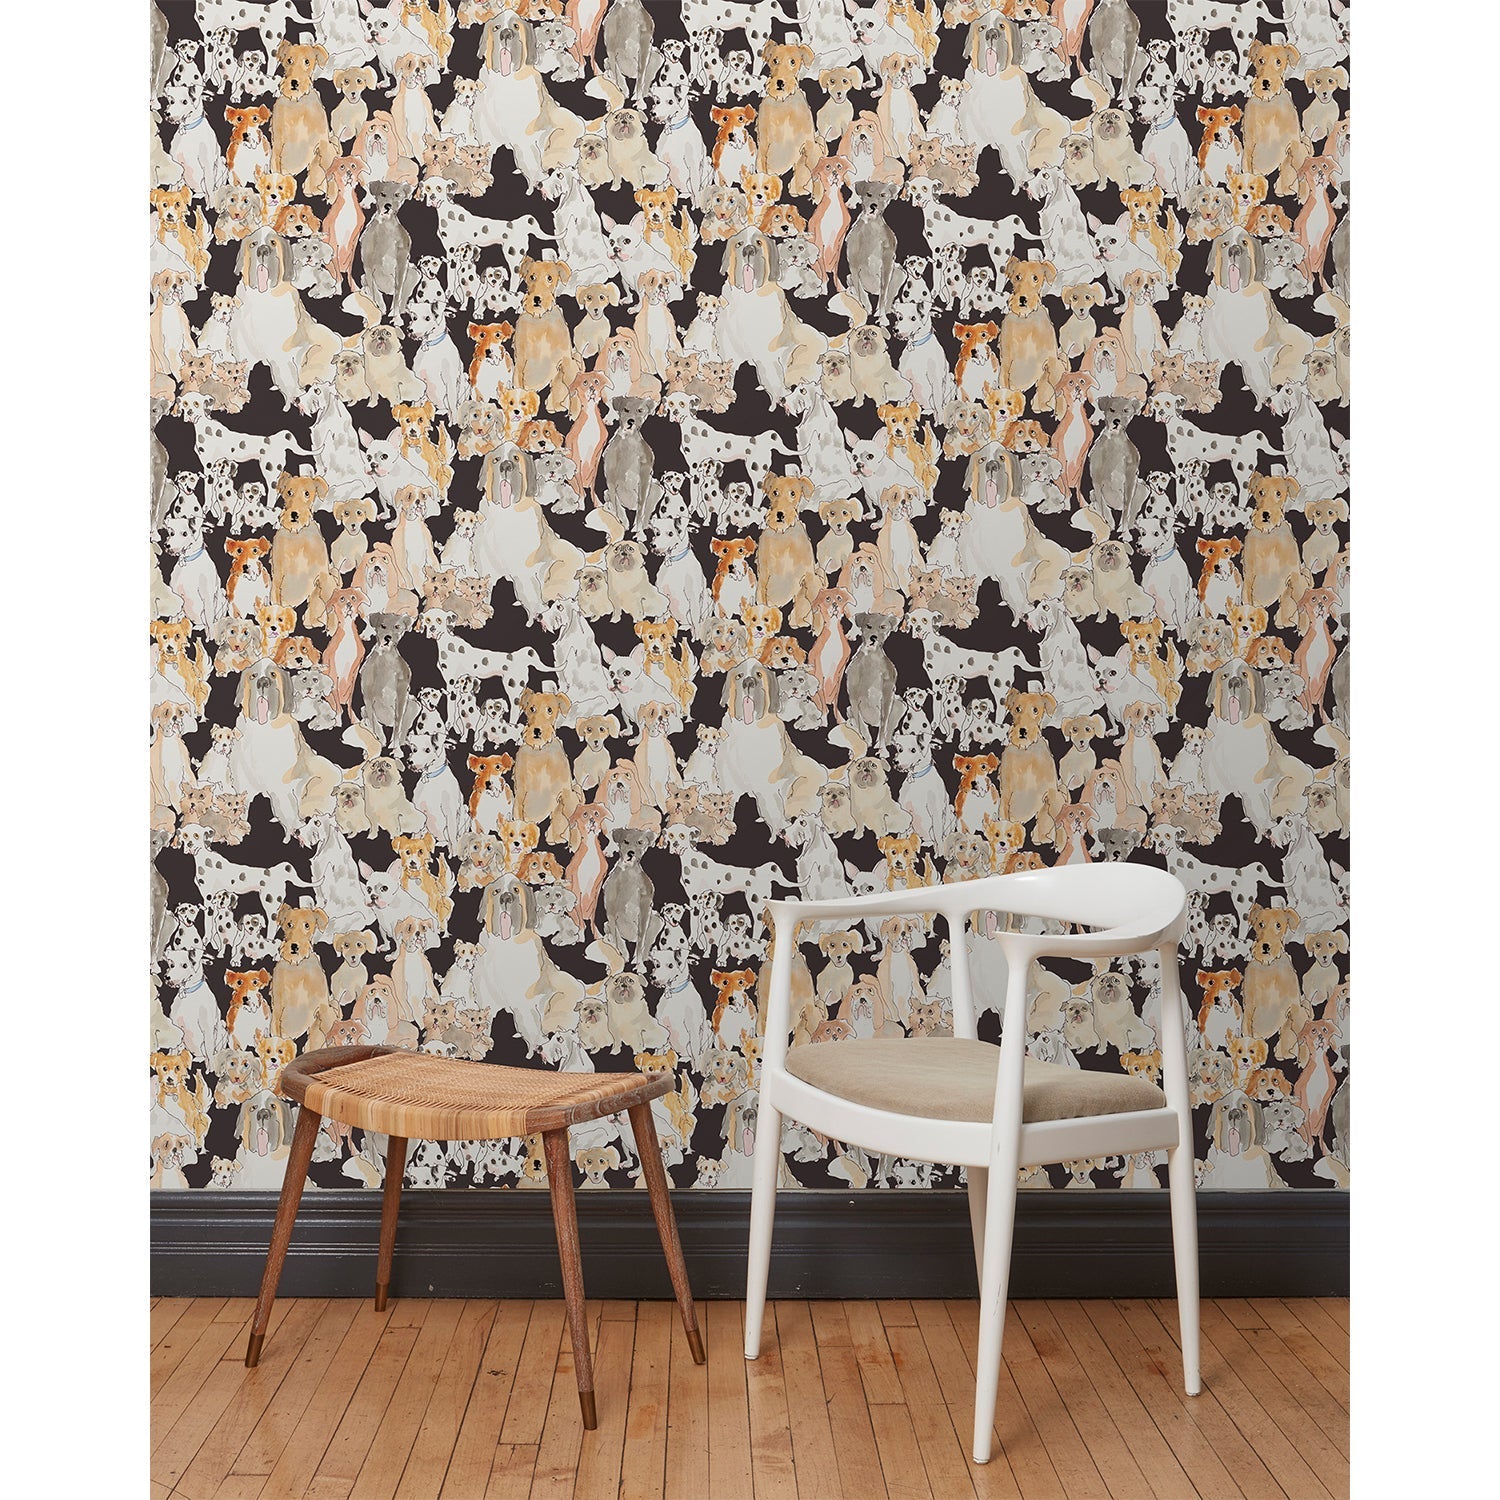 A chair and stool in front of a wall papered in a pattern of many different types of illustrated watercolor dogs with a black background.